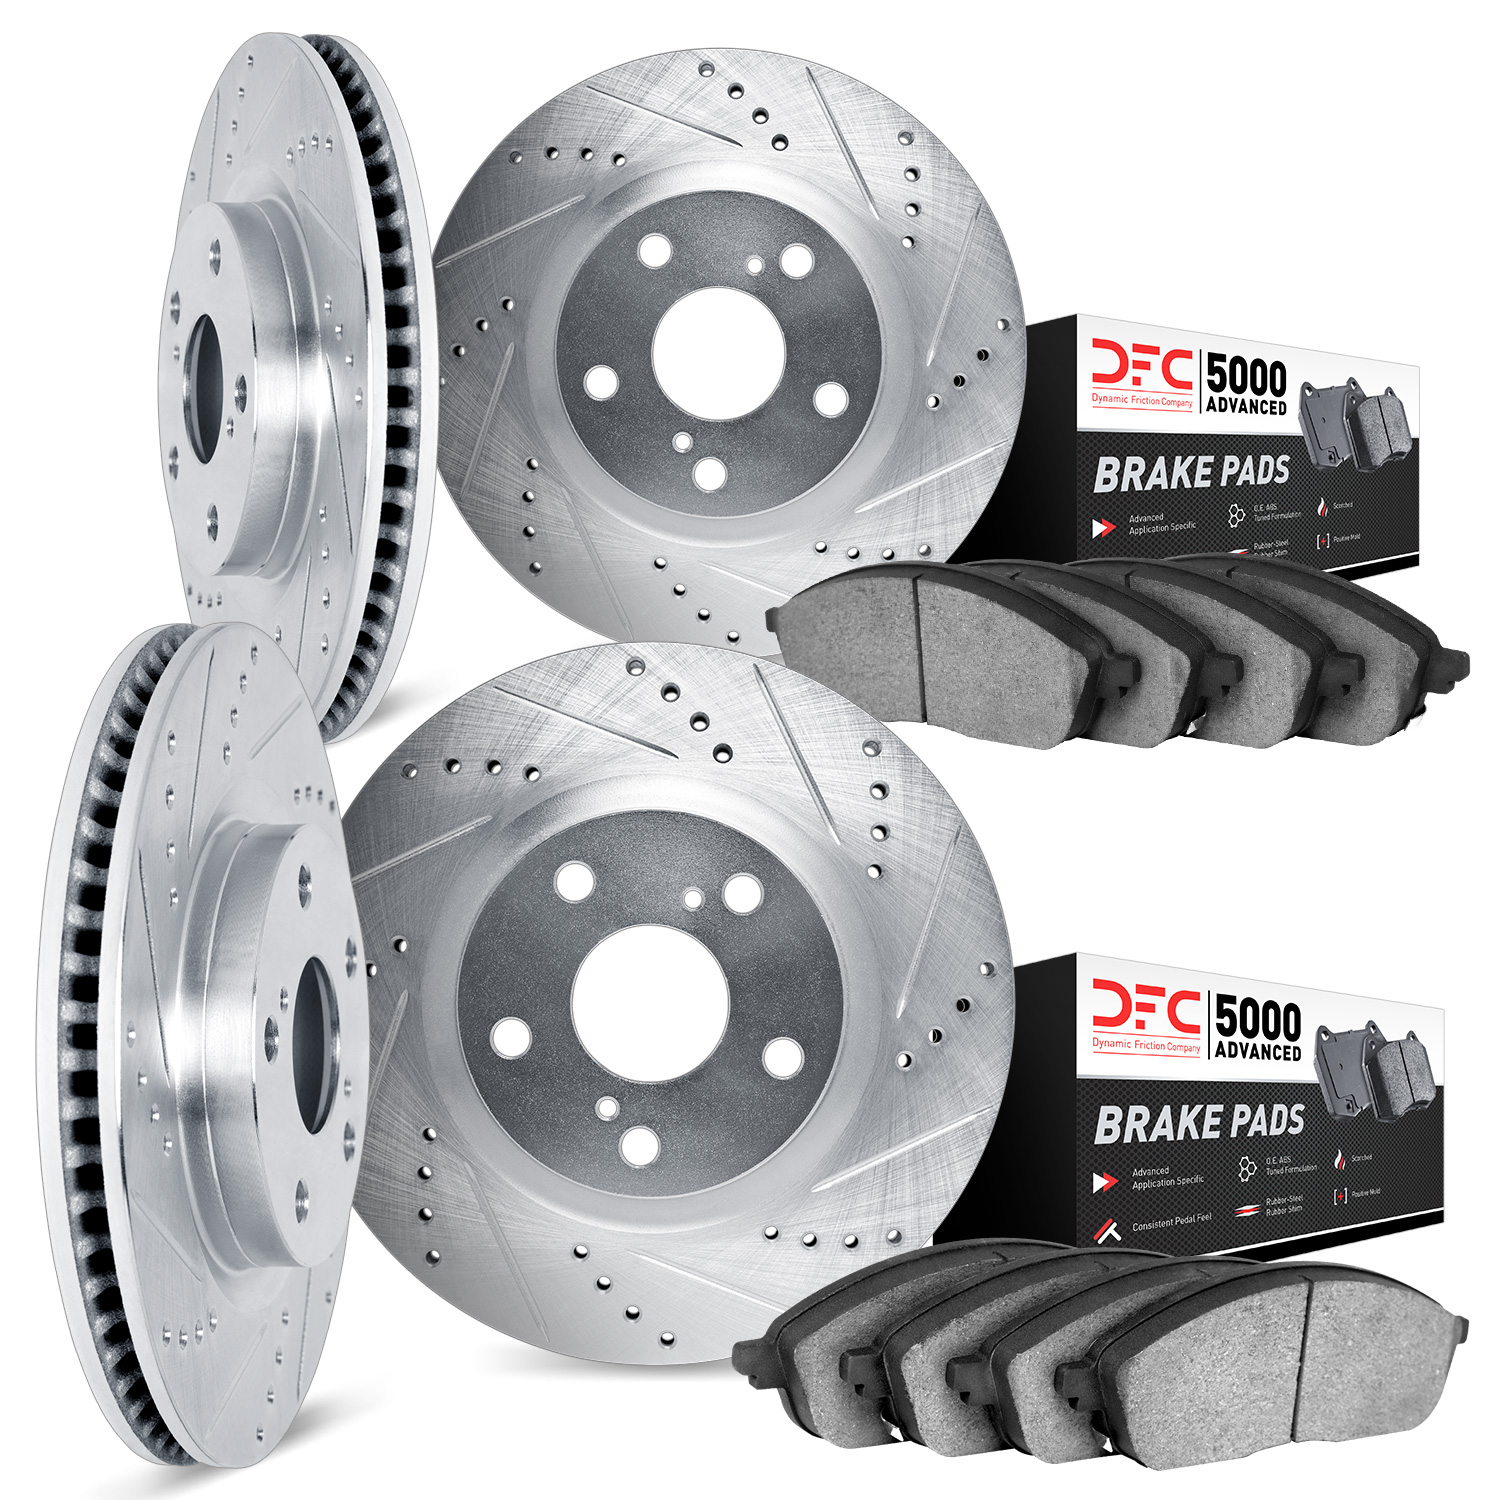 7504-31065 Drilled/Slotted Brake Rotors w/5000 Advanced Brake Pads Kit [Silver], 2007-2014 BMW, Position: Front and Rear